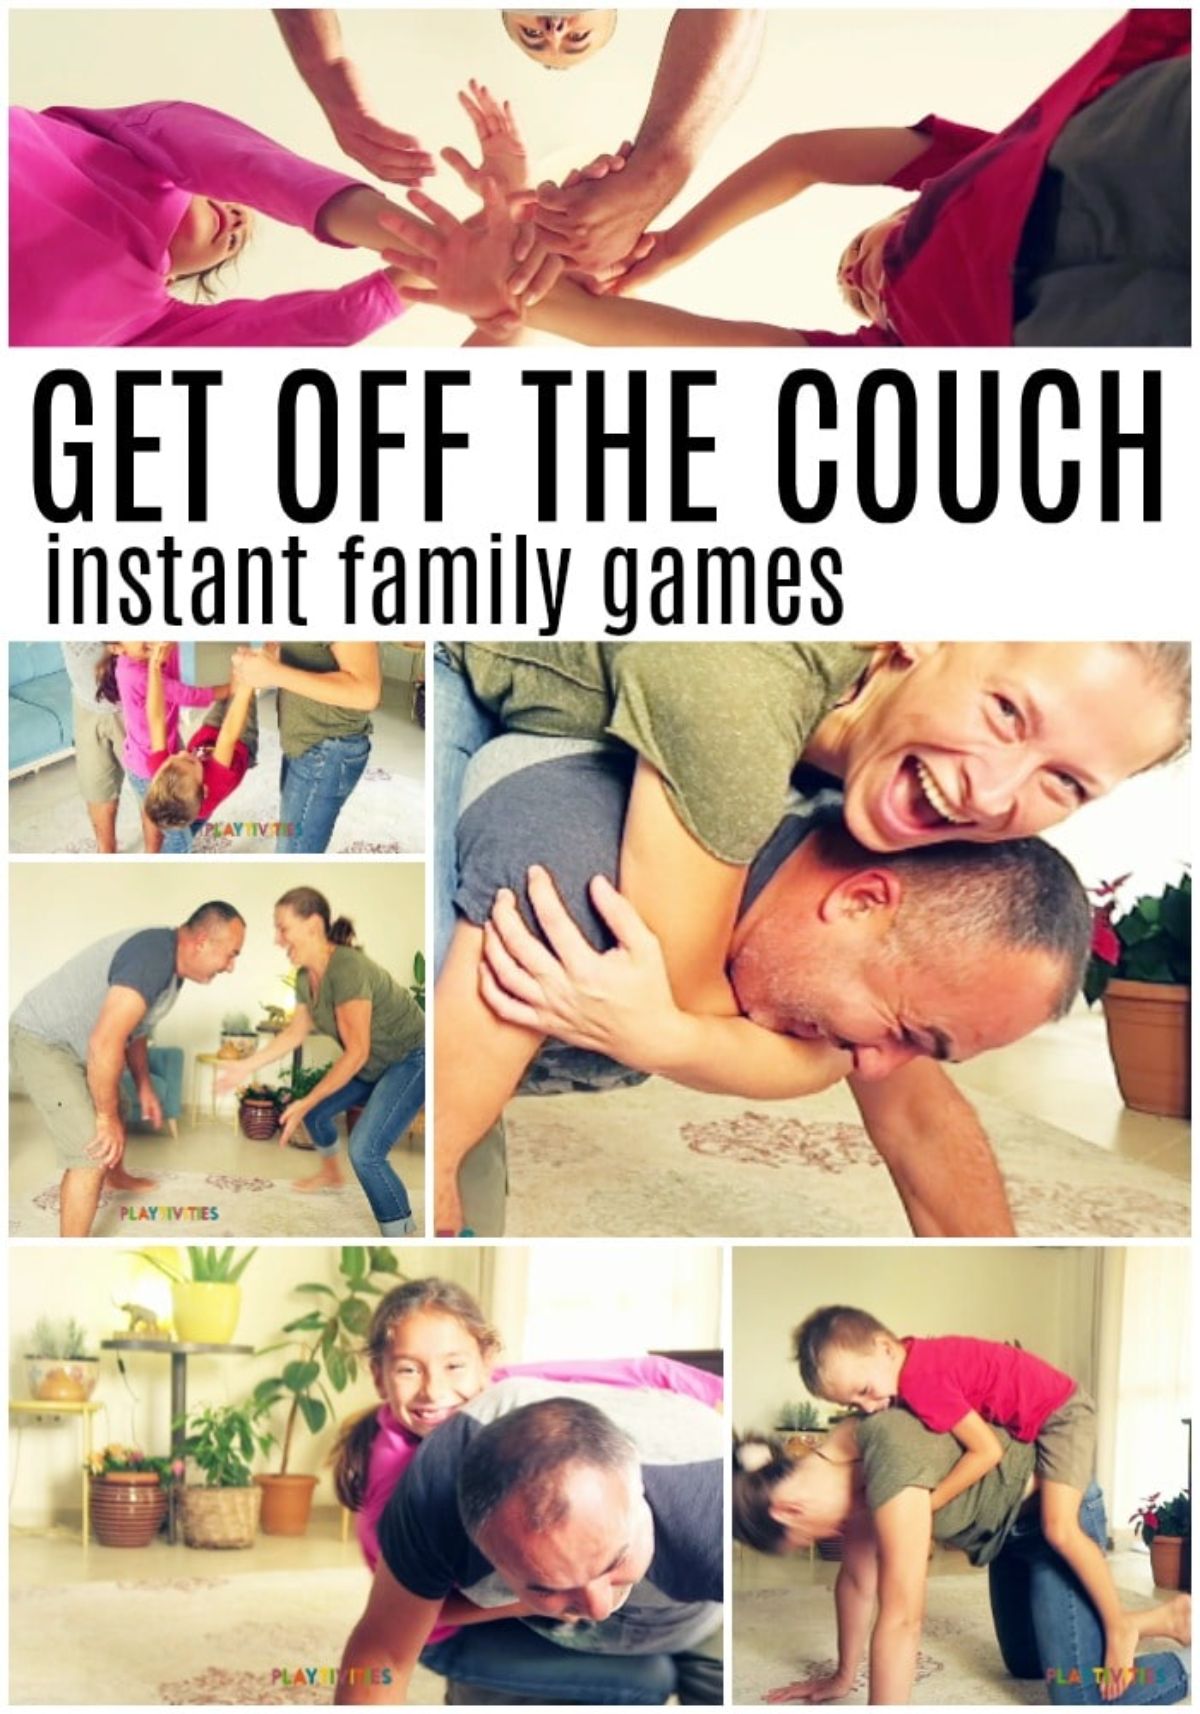 THe text reads "Get off the couch instant family games" various images are seen of a family jumping around and climbing on each other